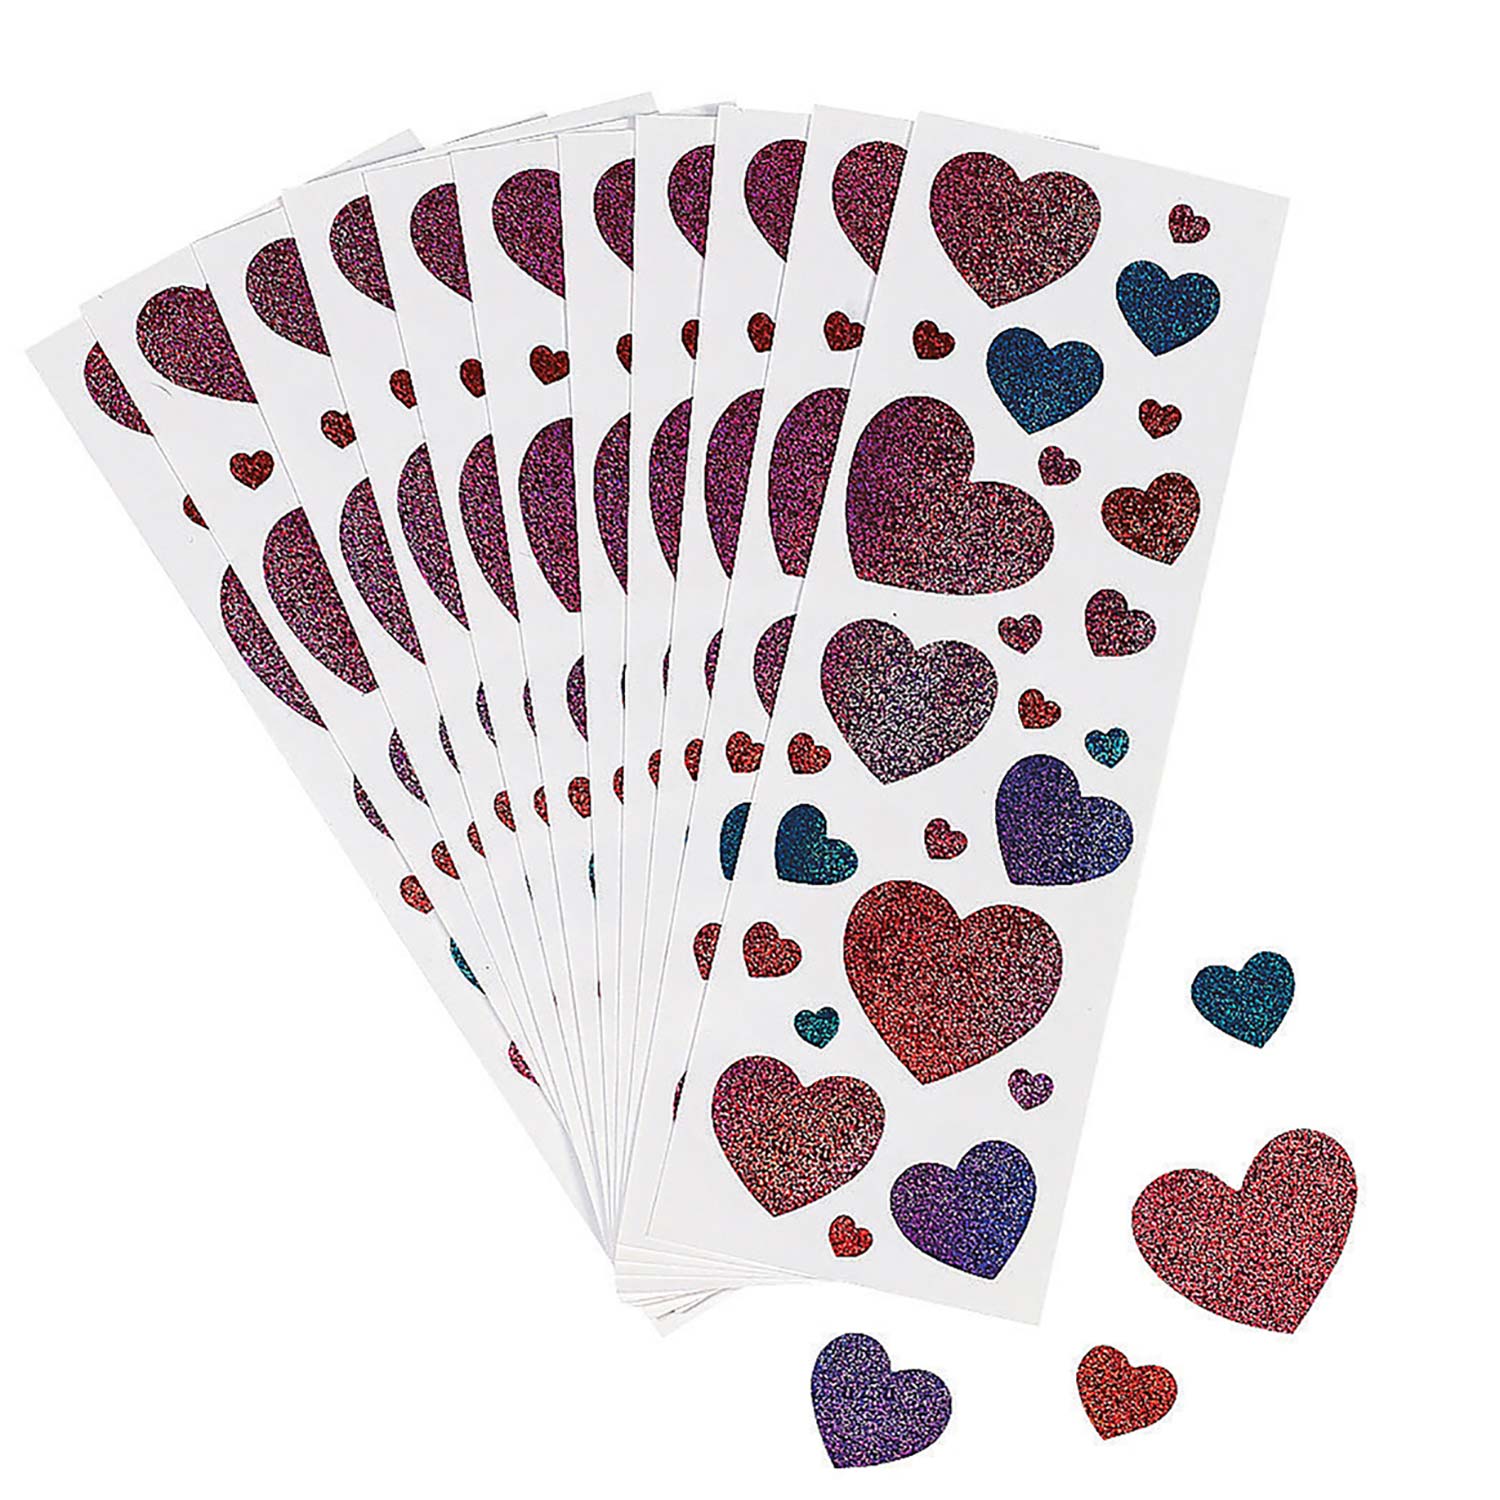 Glitter Heart Stickers Sheets - 12 Count